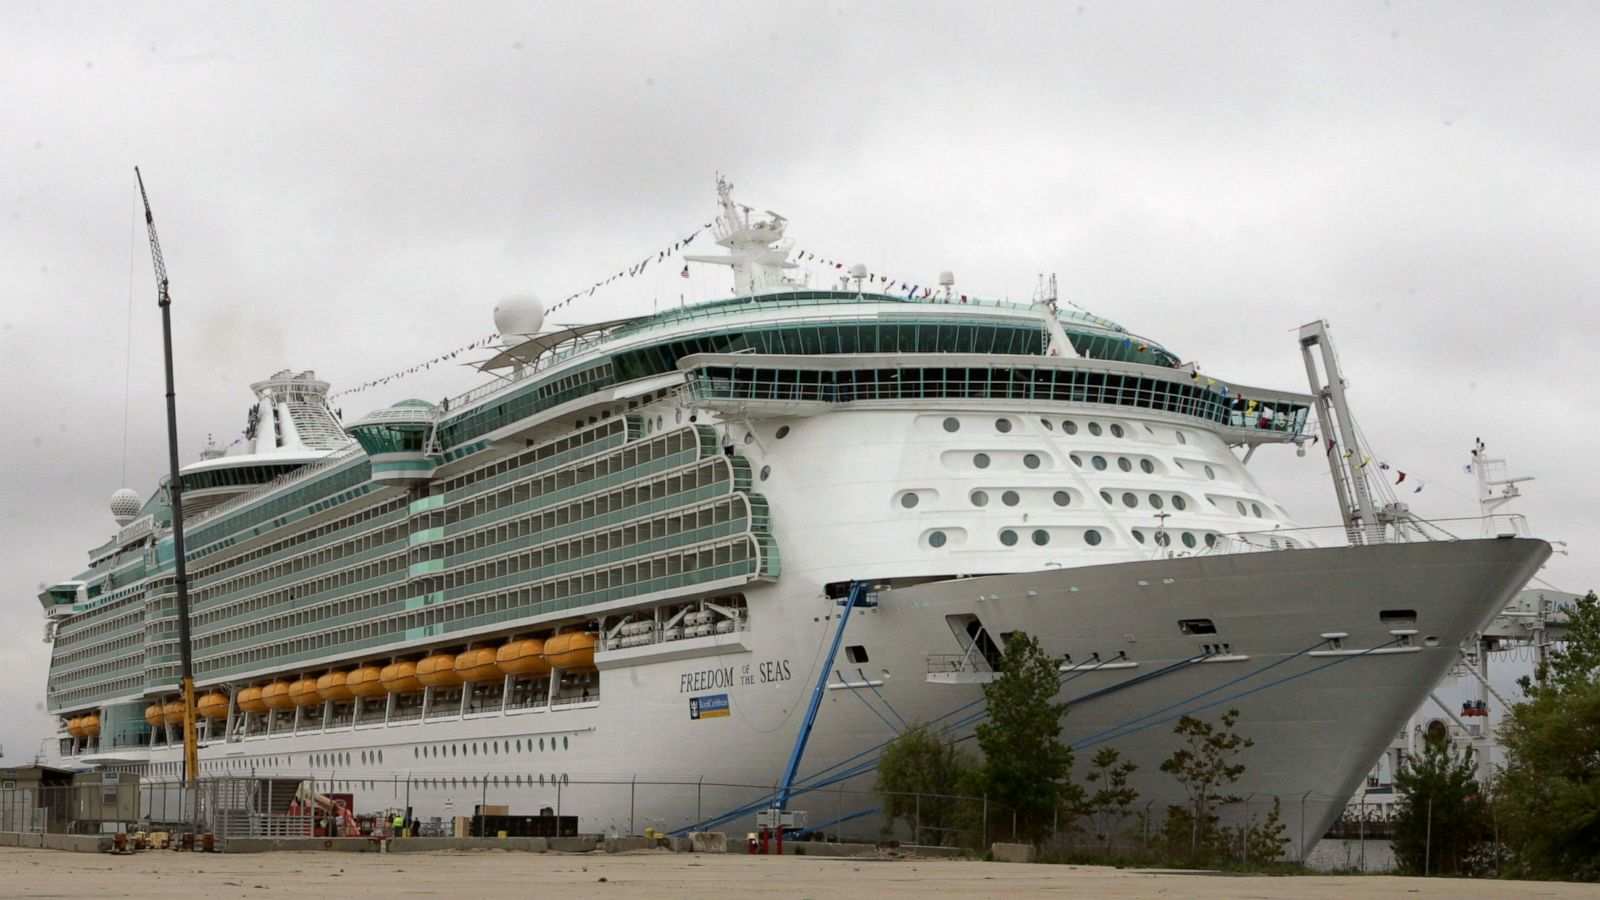 Parents Of Girl Who Fell To Her Death Sue Cruise Company Abc News Images, Photos, Reviews